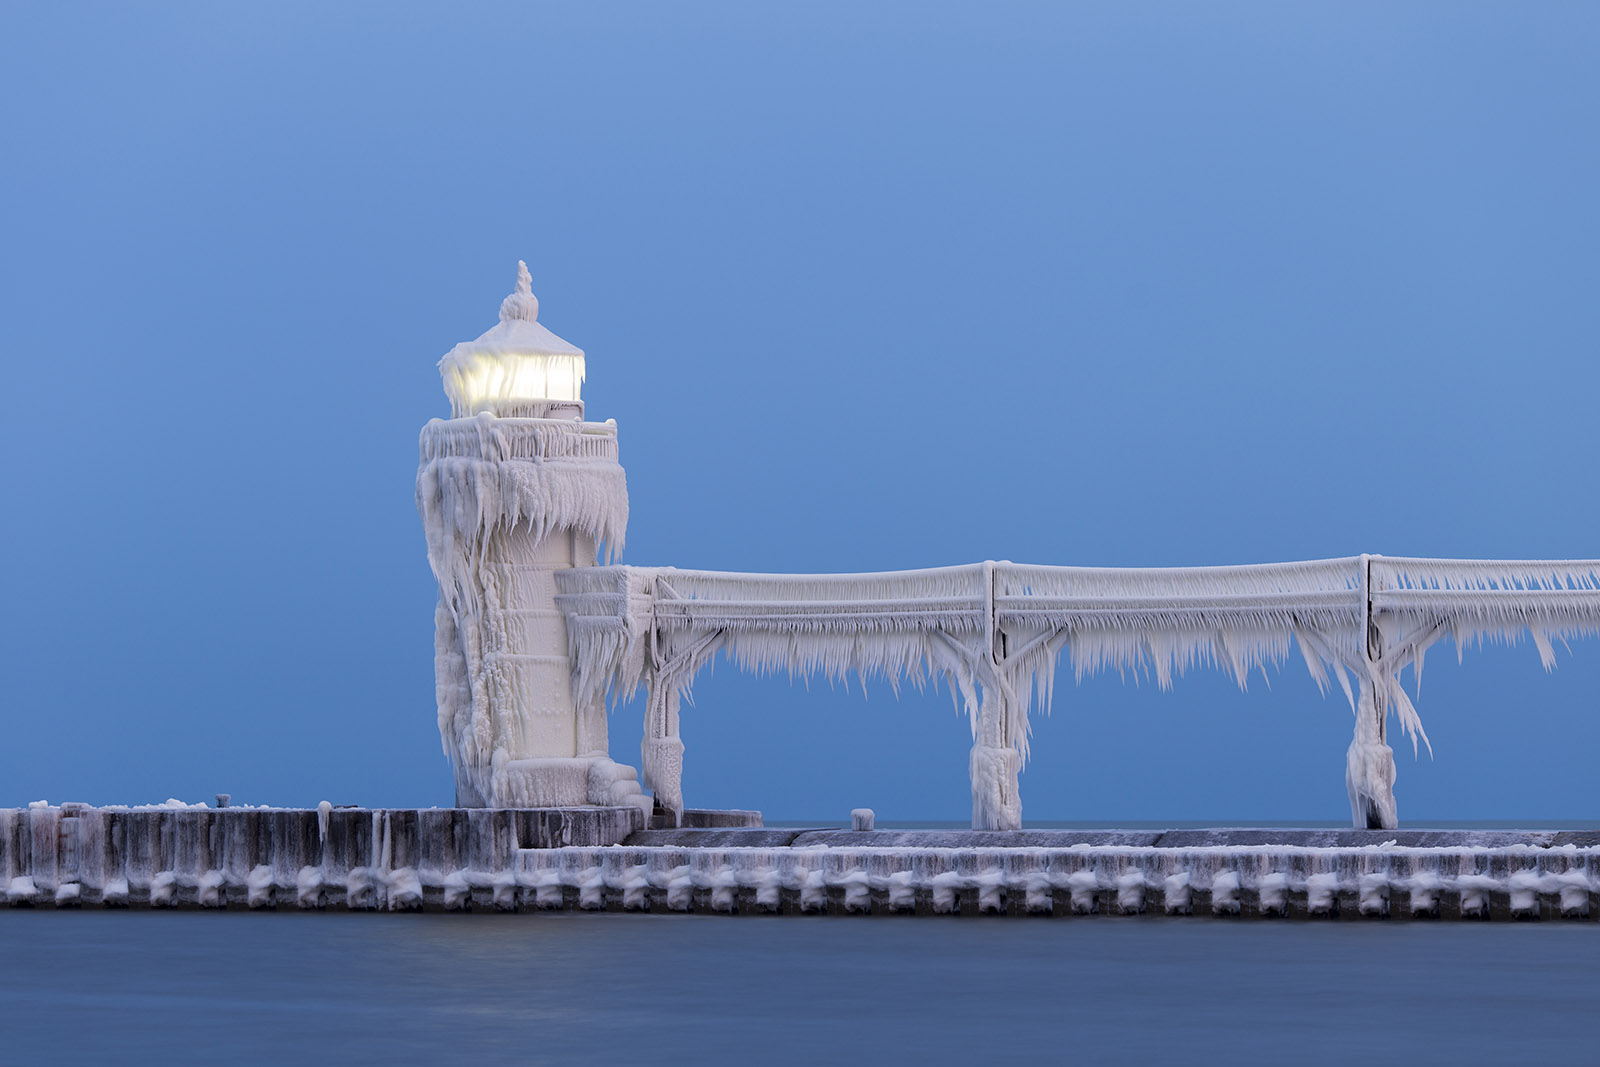 The St. Joseph lighthouse covered in ice